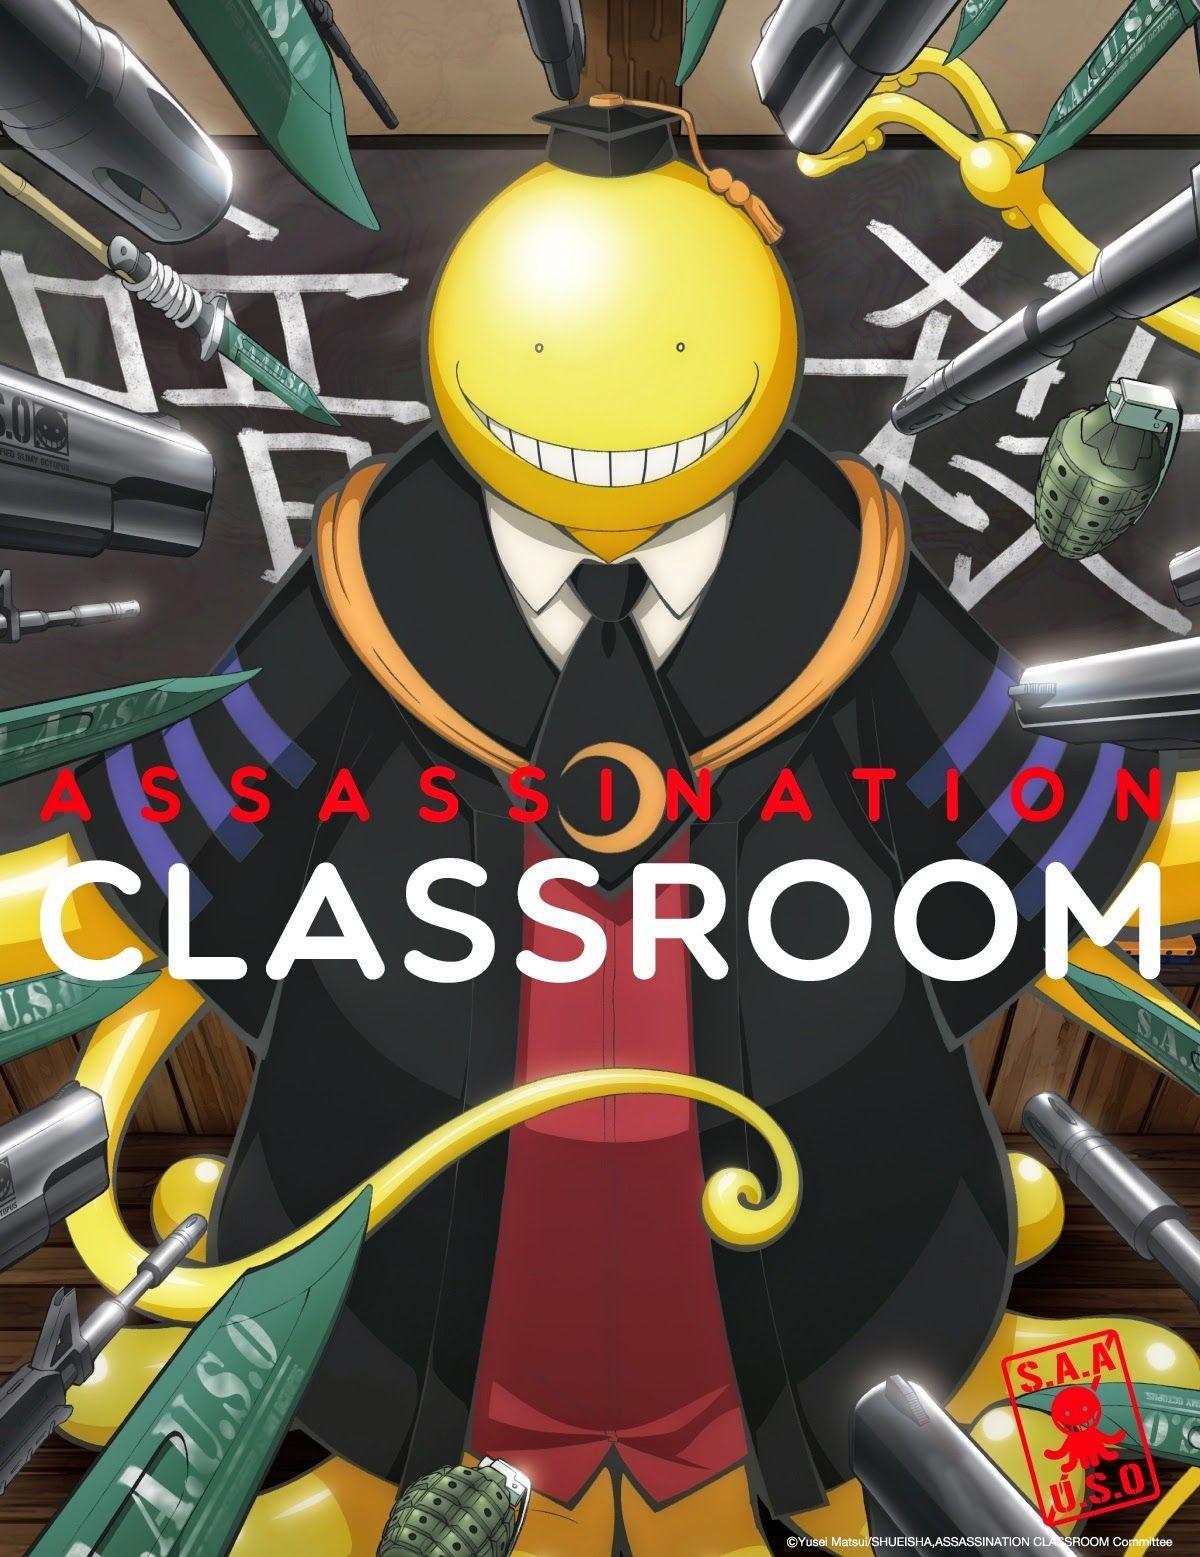 image about Assassination Classroom